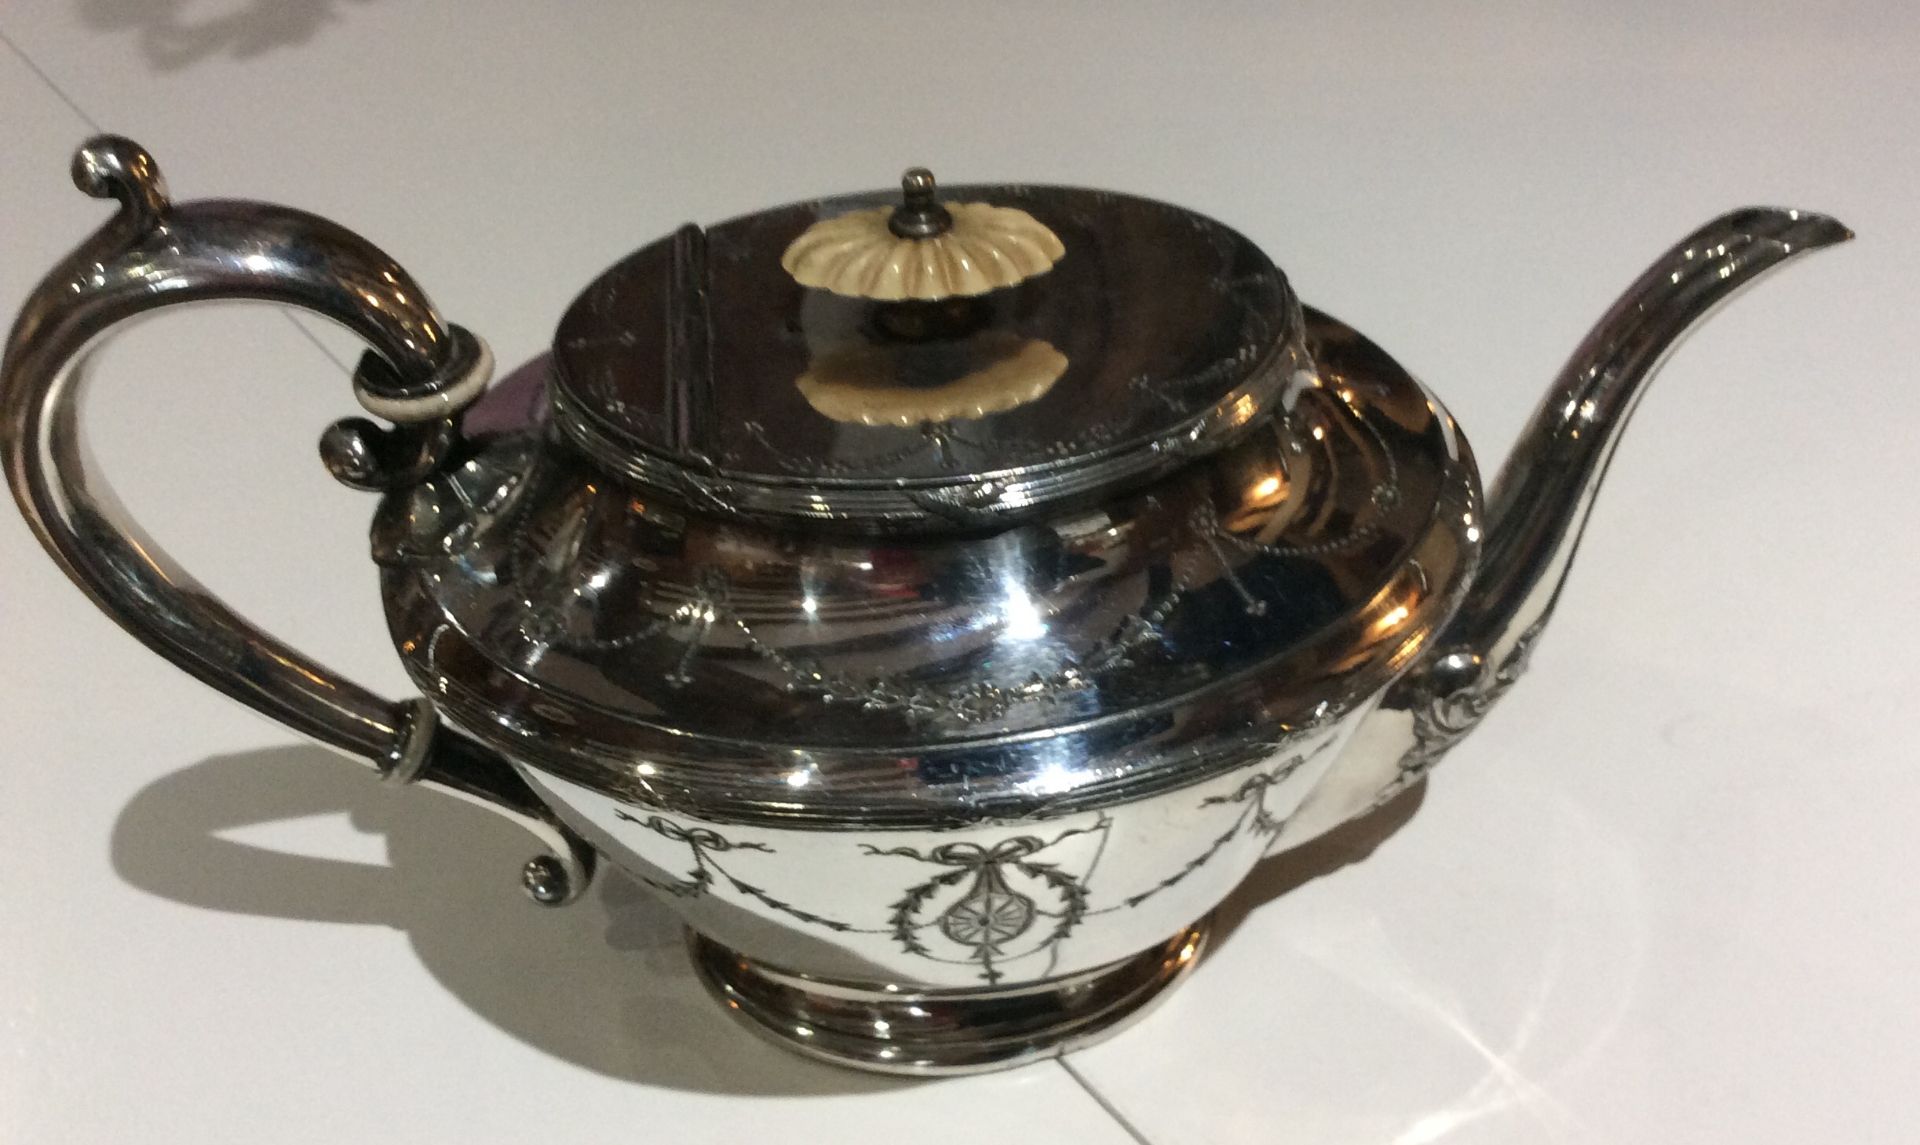 Antique highly decorative English tea pot silver plated - Image 3 of 10